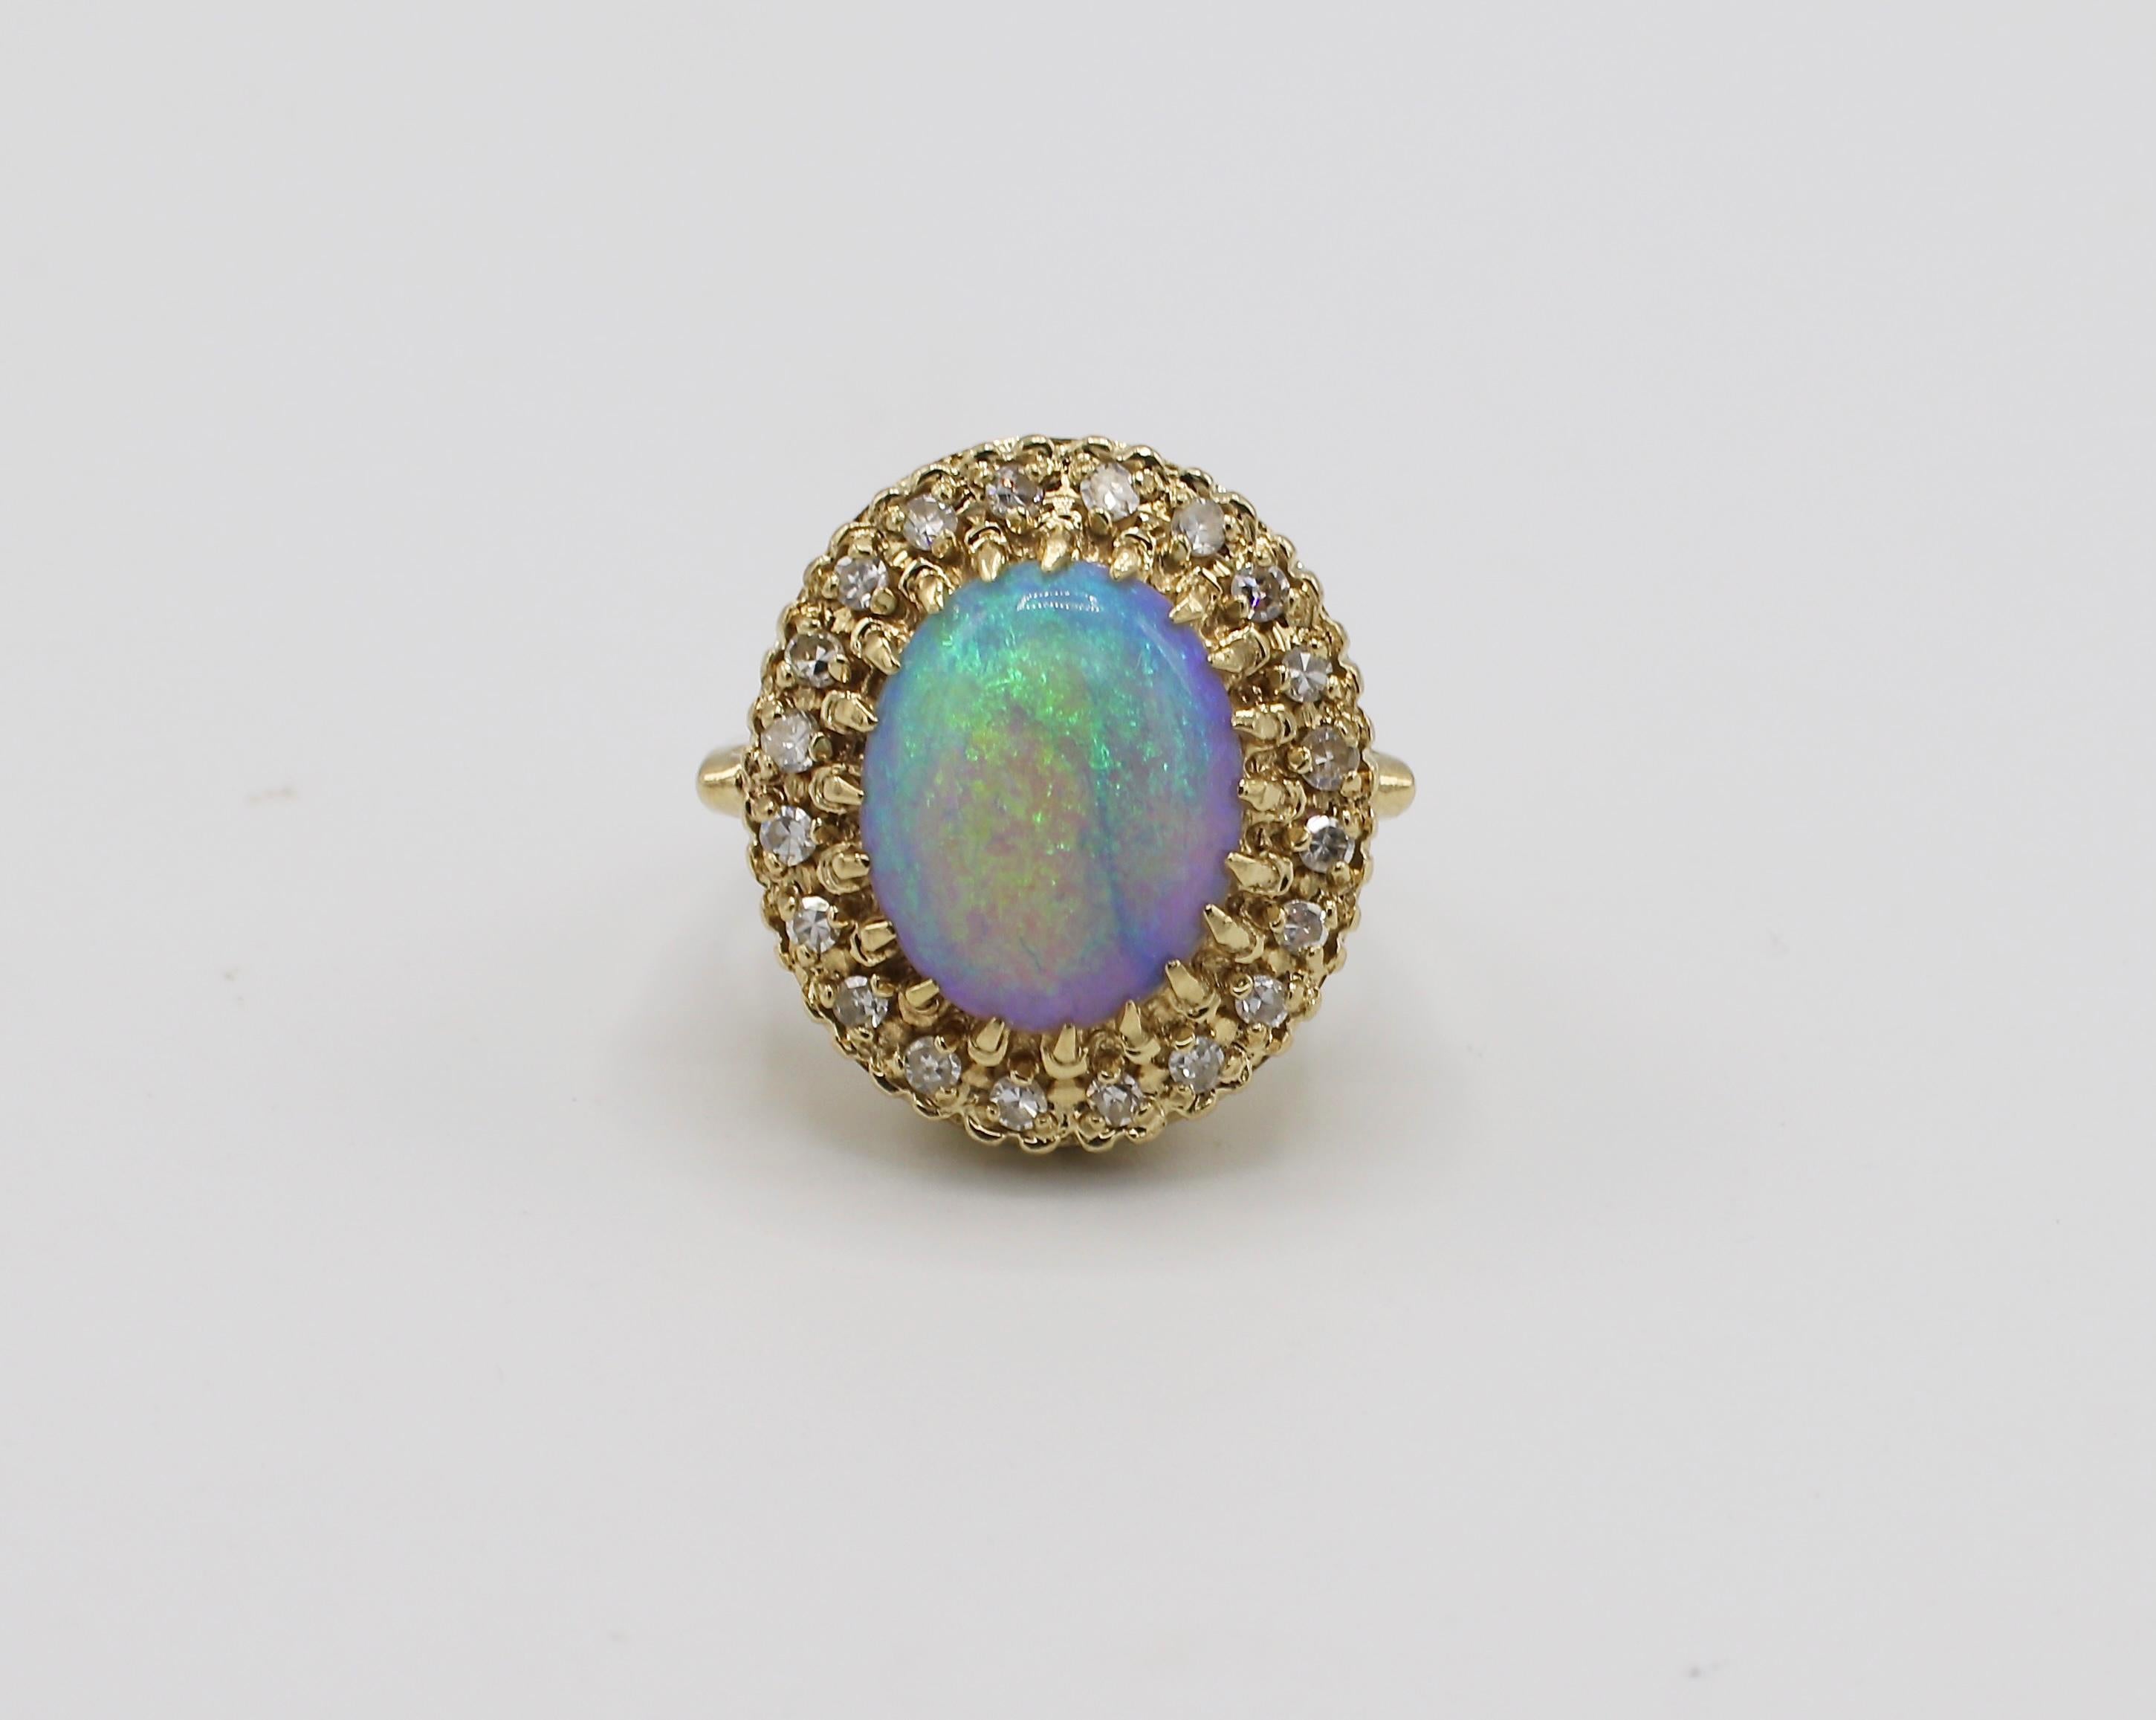 Vintage 14K Yellow Gold Opal & Diamond Halo Cocktail Ring Size 3
Metal: 14k yellow gold
Weight: 5.65 grams
Opal Cabochon: 11 x 9.5, no crazing 
Diamonds: Approx. .20 CTW G-H VS round single cut diamonds
Size: 3
Top of ring measures 18.2 x 16.4MM
